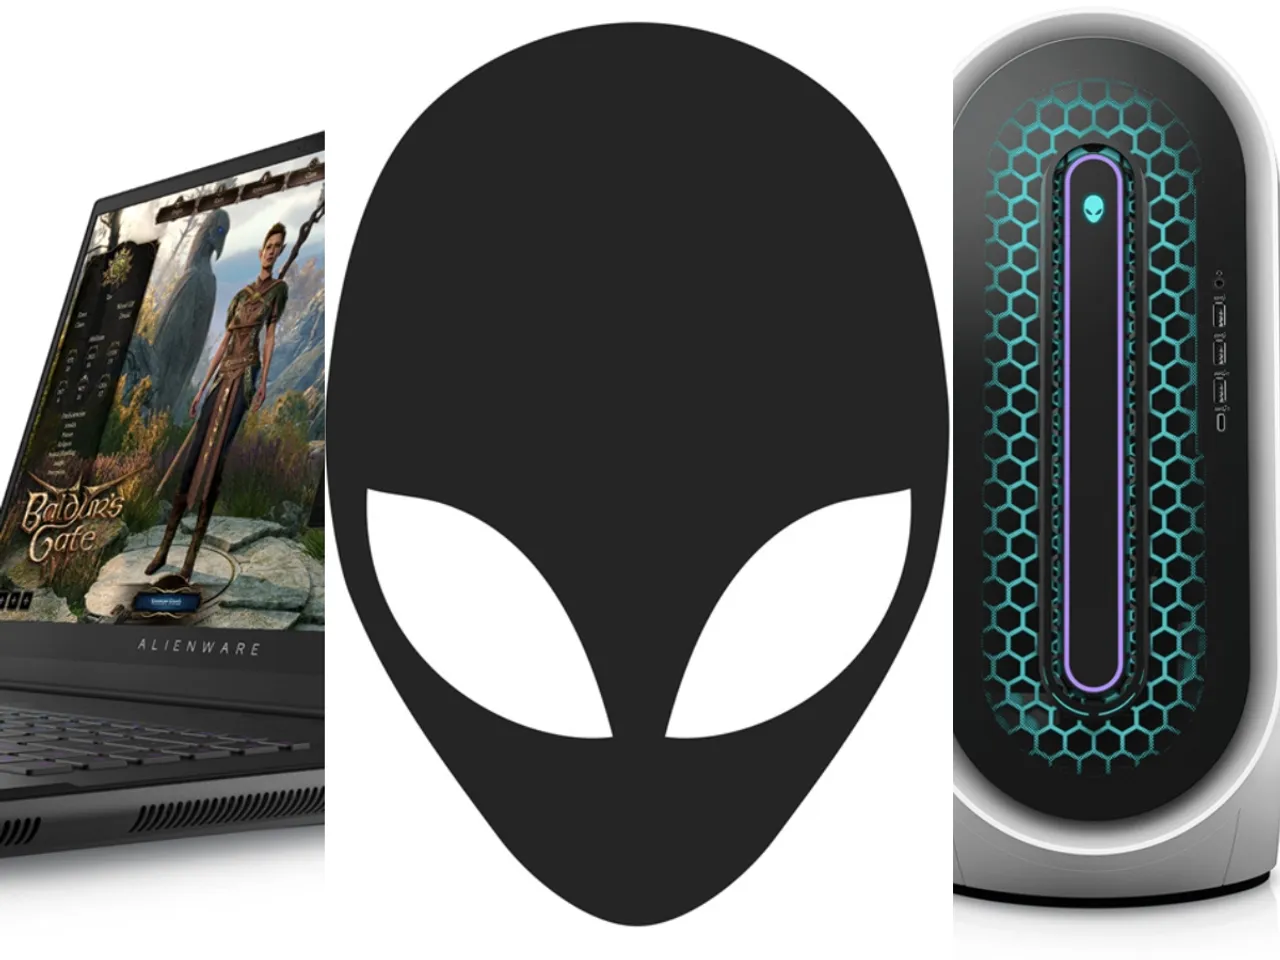 Best Black Friday deals on Dell Alienware gaming PCs, laptops, and monitors.jpg